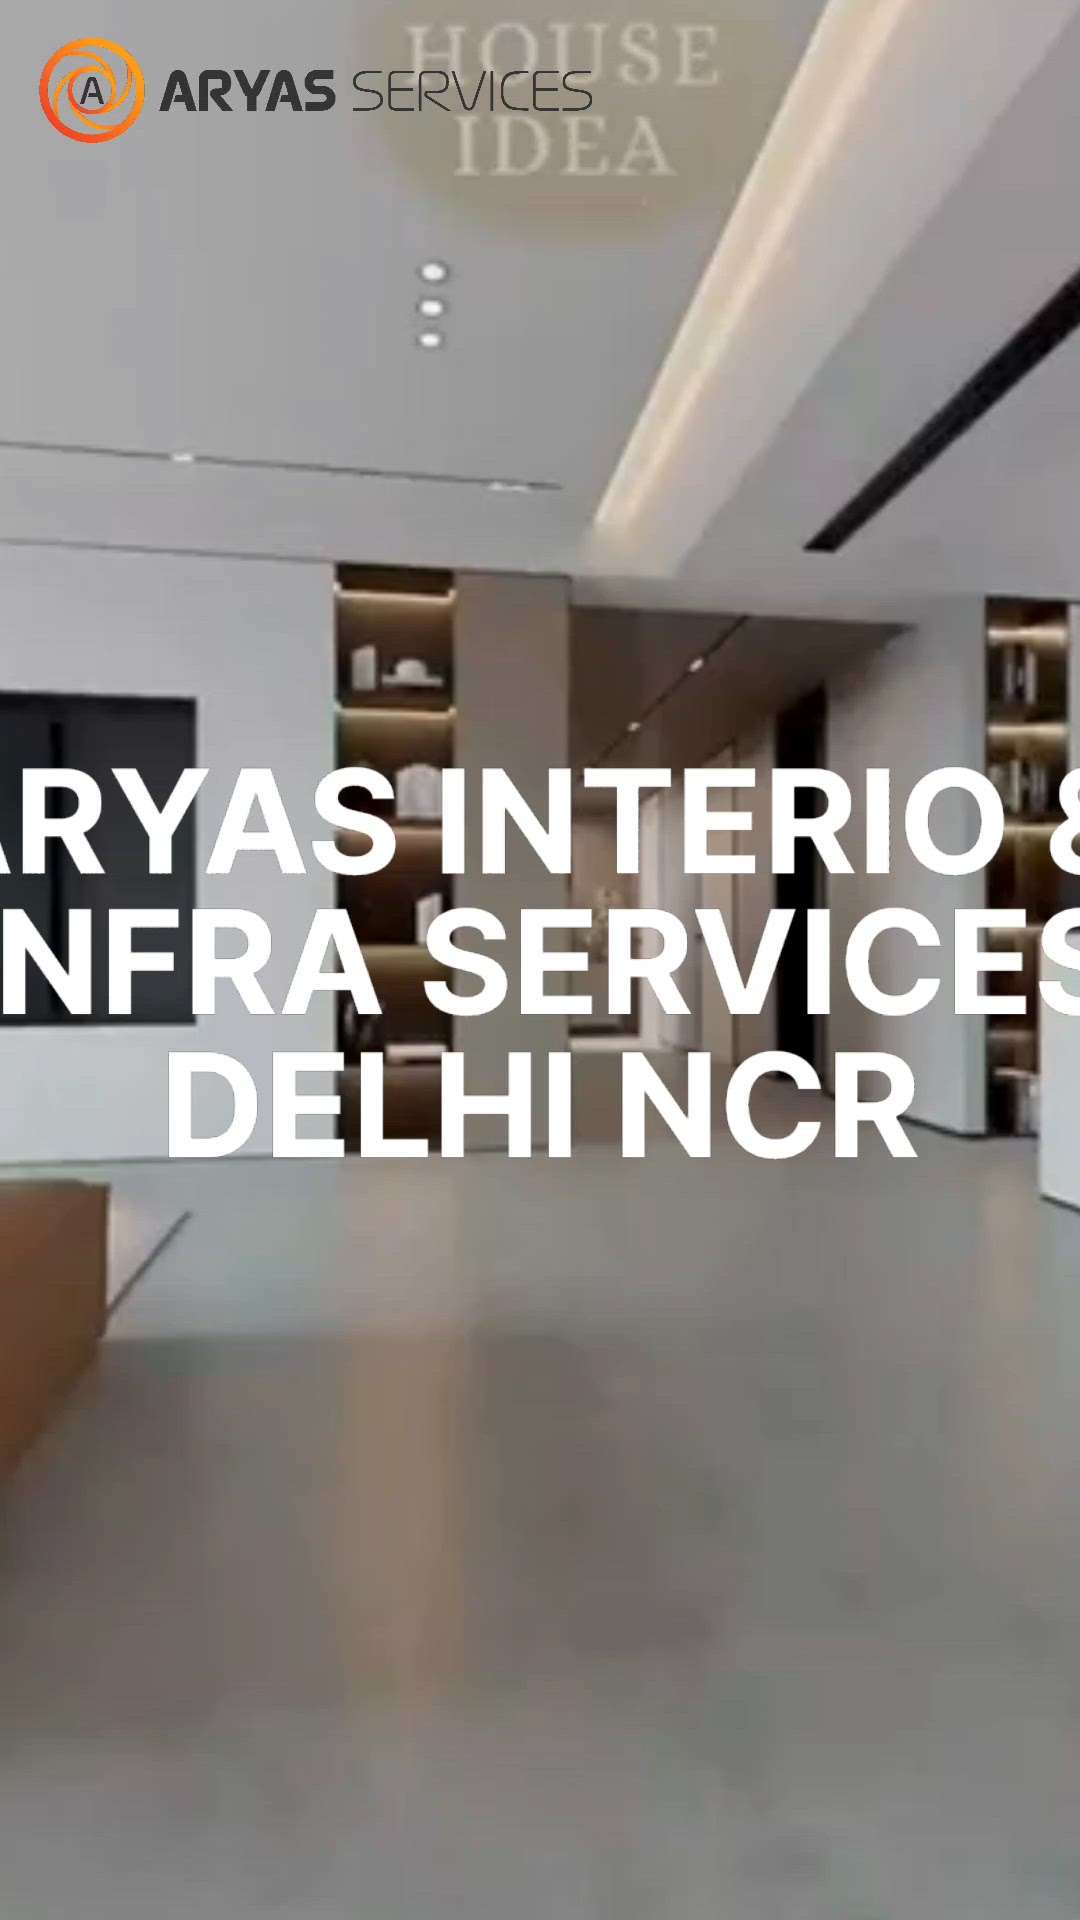 Luxury flat interiors services by Aryas interio & Infra Services,
Provide complete end to end Professional Construction & interior Services in Delhi Ncr, Gurugram, Ghaziabad, Noida, Greater Noida, Faridabad, chandigarh, Manali and Shimla. Contact us right now for any interior or renovation work, call us @ +91-7018188569 &
Visit our website at www.designinterios.com
Follow us on Instagram #aryasinterio and Facebook @aryasinterio .
#uttarpradesh #construction_himachal
#noidainterior #noida #delhincr #delhi #Delhihome  #noidaconstruction #interiordesign #interior #interiors #interiordesigner #interiordecor #interiorstyling #delhiinteriors #greaternoida #faridabad #ghaziabadinterior #ghaziabad  #chandigarh